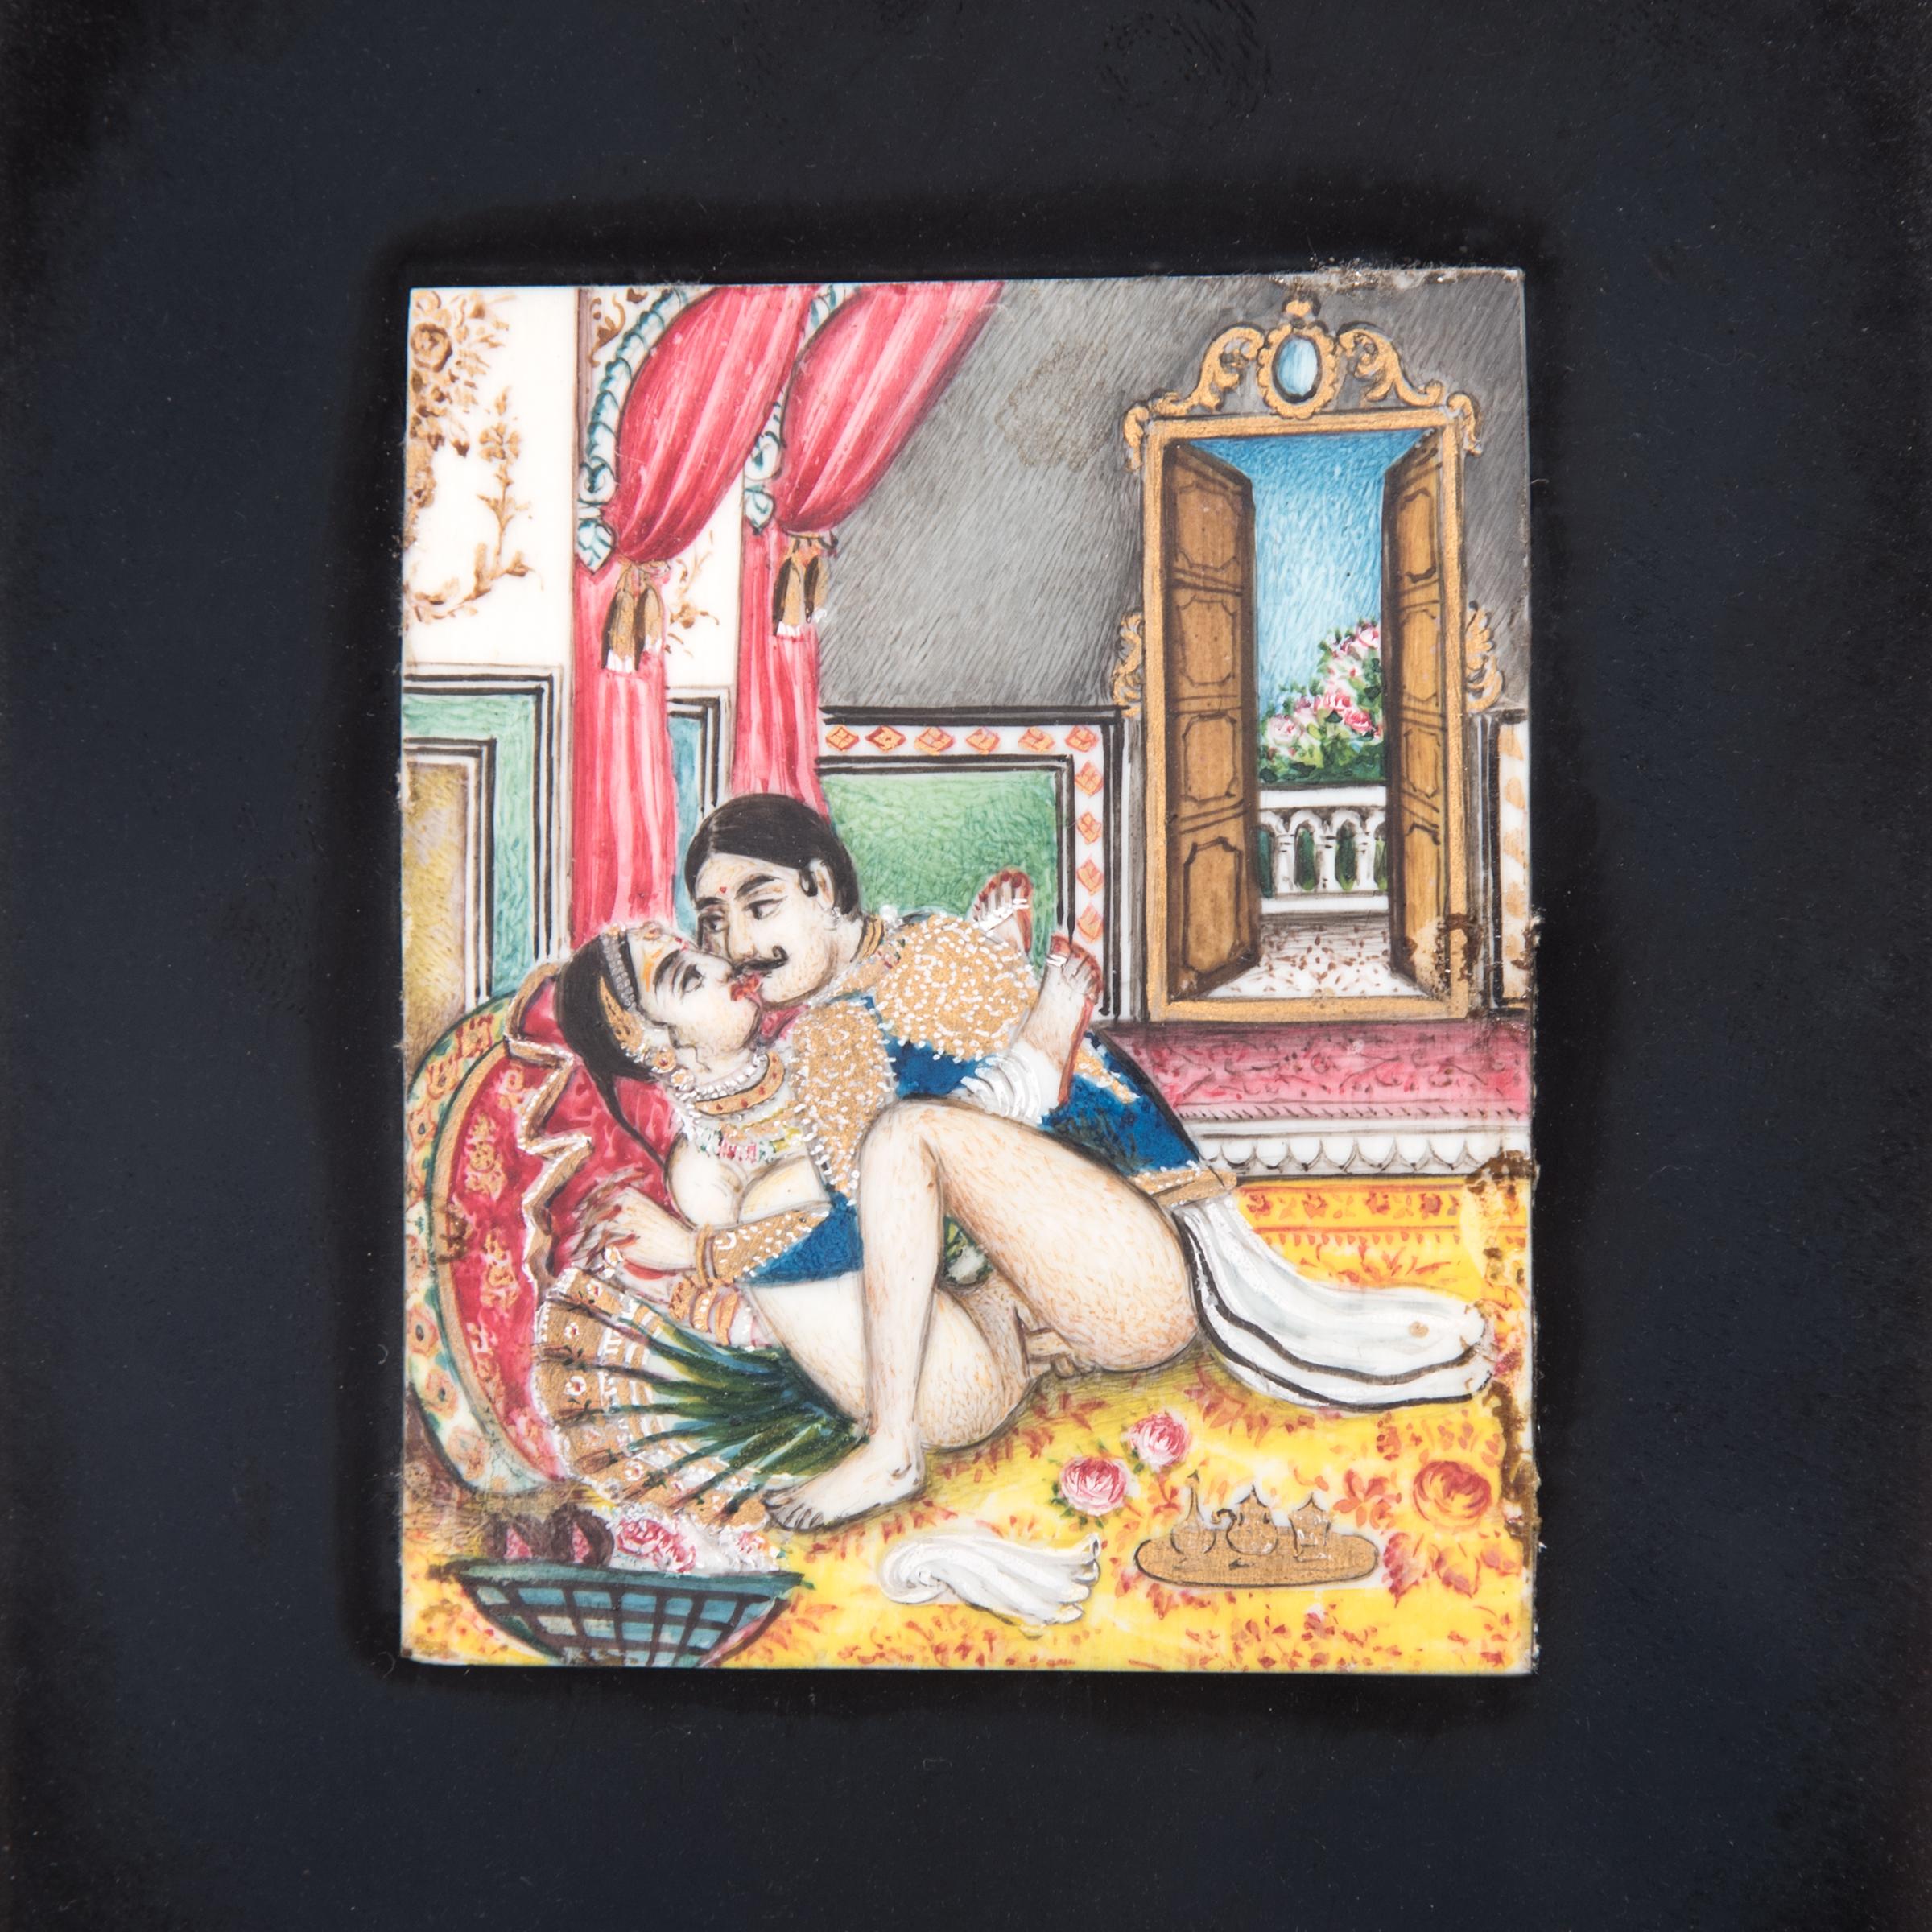 Although the Kama Sutra, India’s famous guide to sensual living, wouldn’t be translated into English until the late 19th century, foreigners in India during the heyday of the British East India Company could easily have obtained erotic imagery